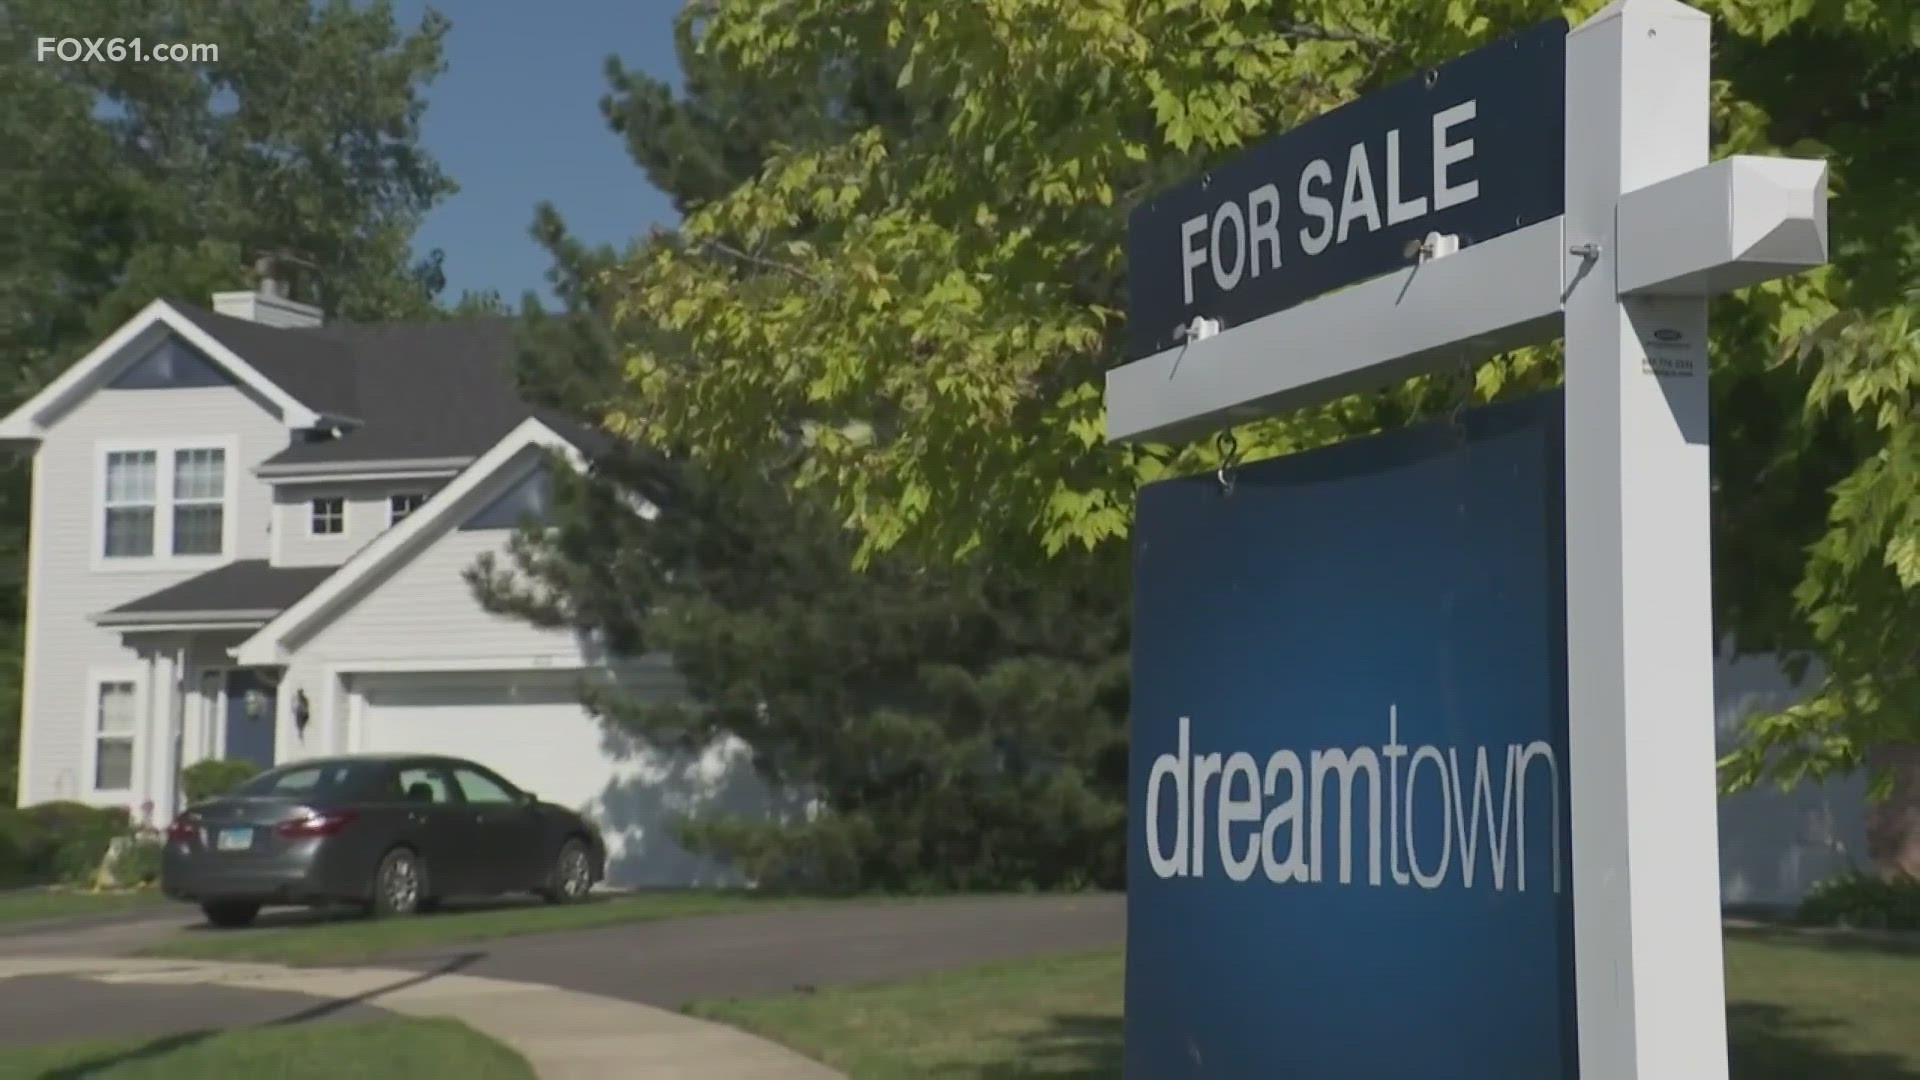 A local realtor says over the past five years, the state of real estate can be summed up in two ways: long timetables and lots of disappointment.